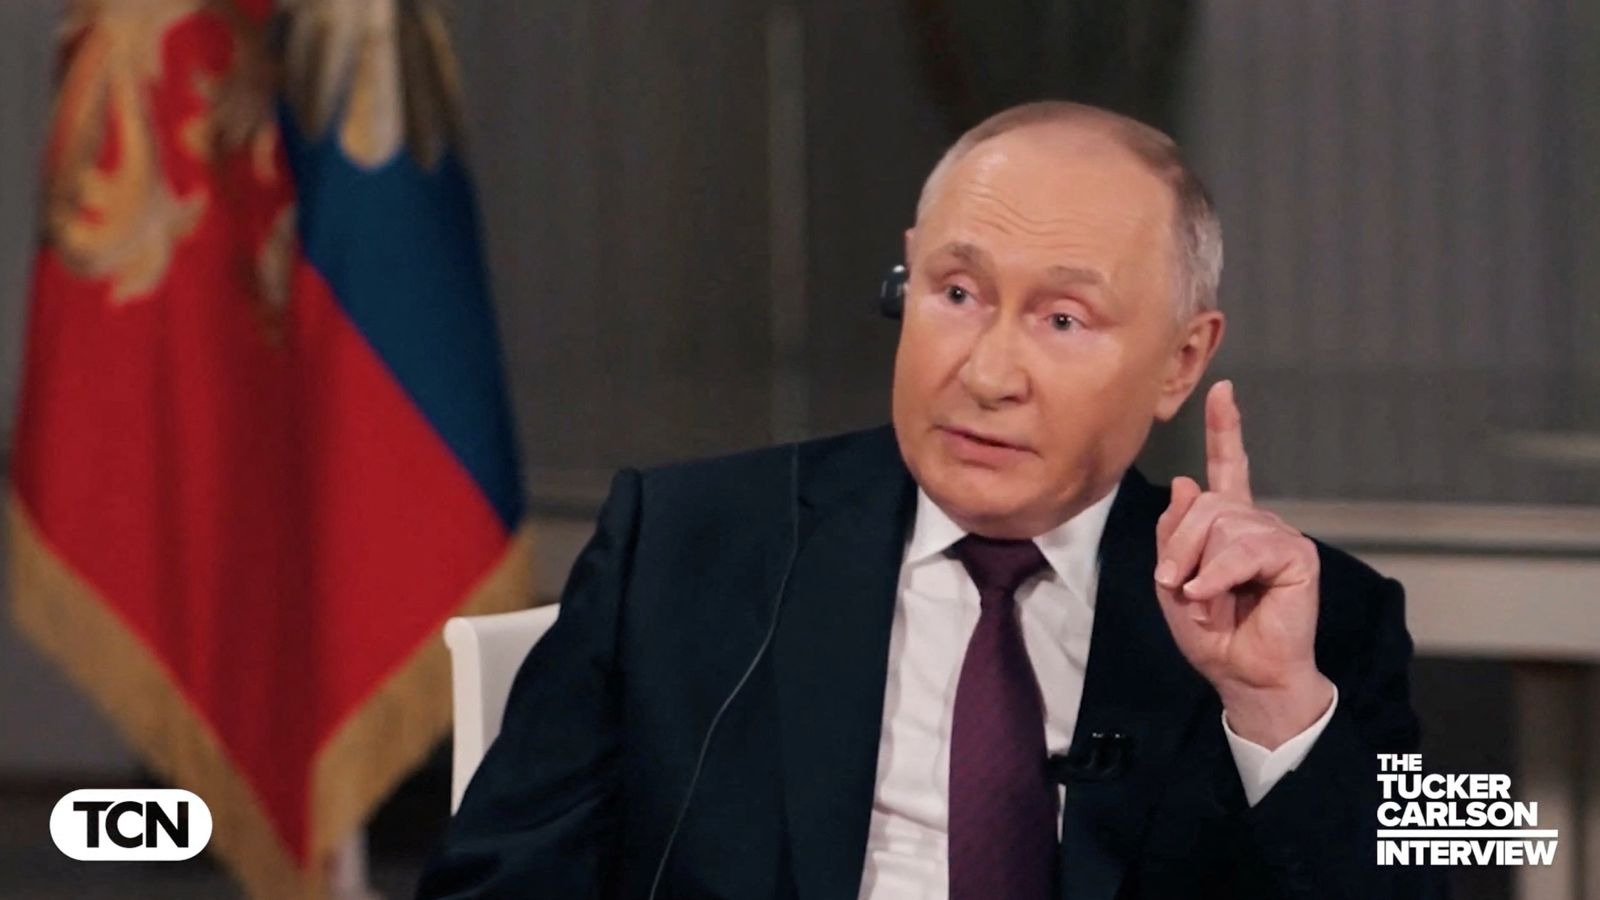 Putin on invading Poland, the war in Ukraine, American 'spies' and Russia joining NATO